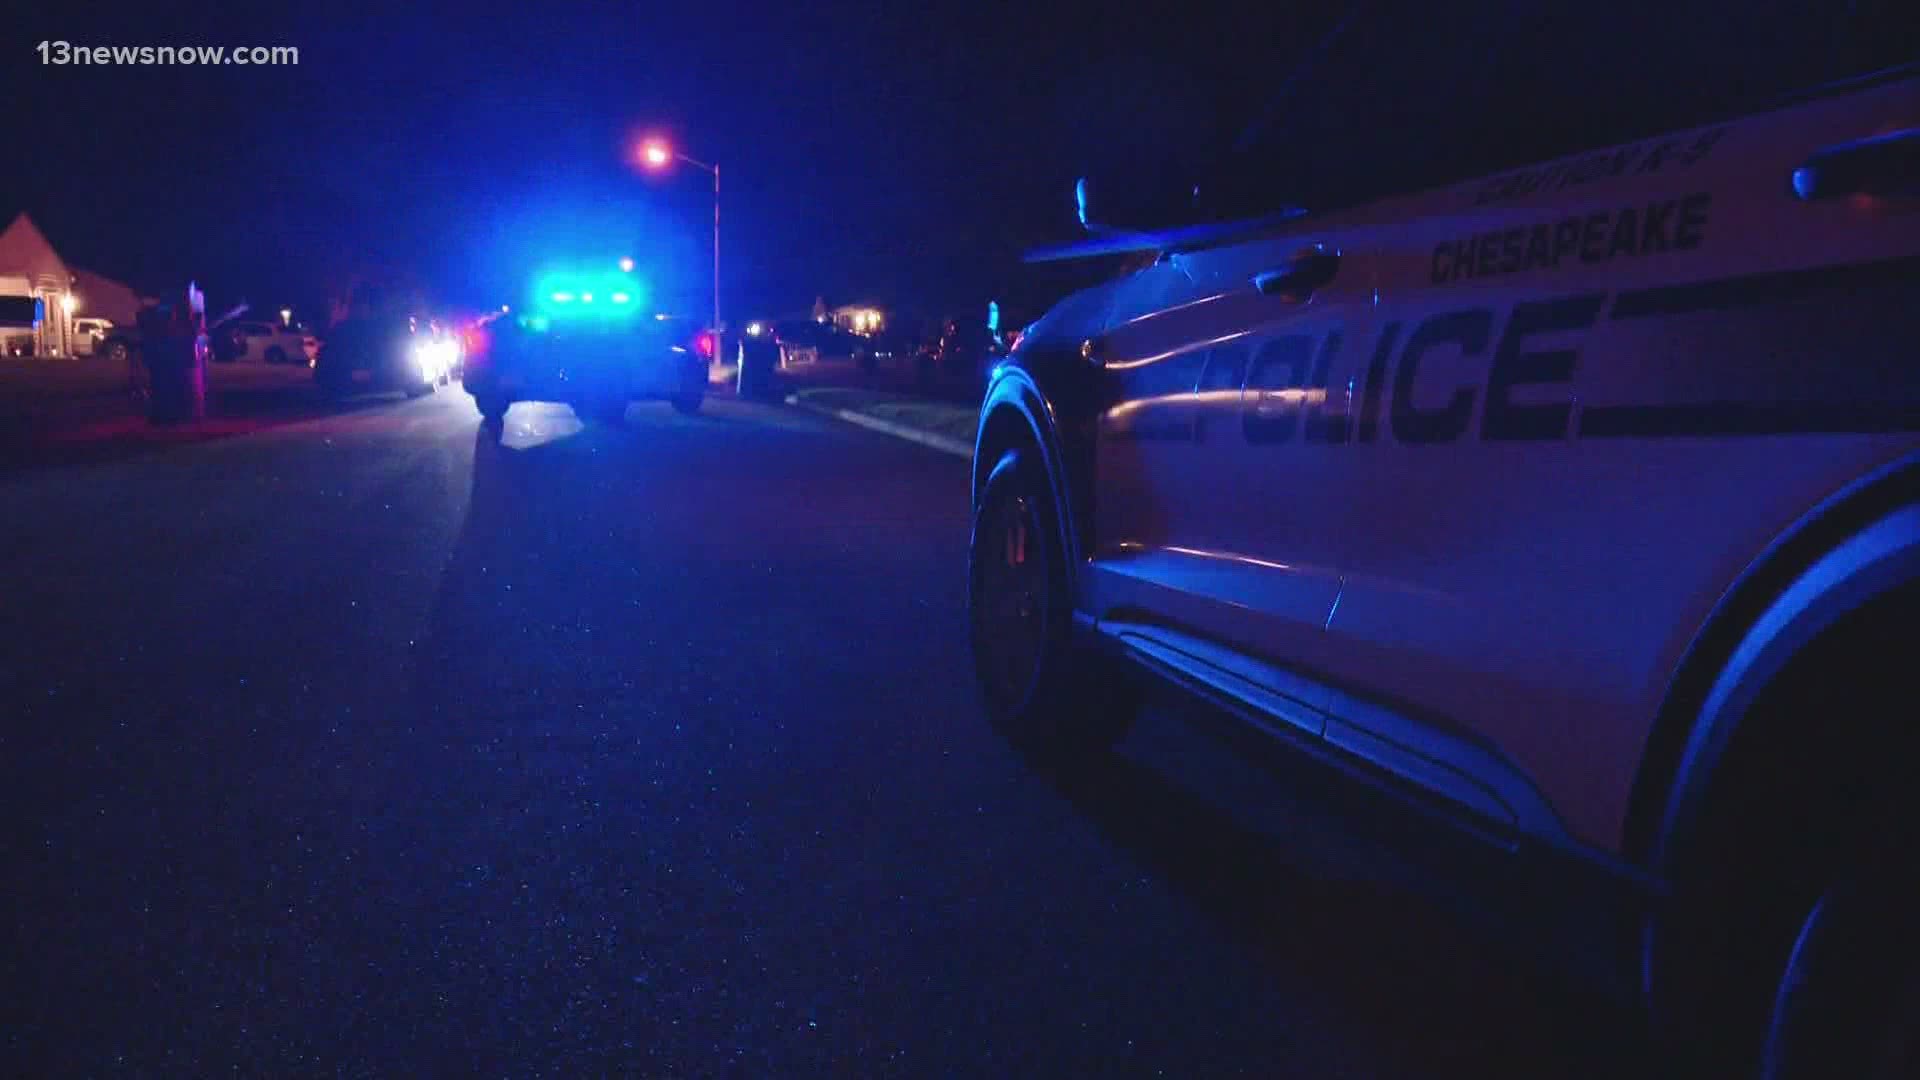 An 18-year-old and a 16-year-old were shot Wednesday night in Chesapeake. The 16-year-old has life-threatening injuries.